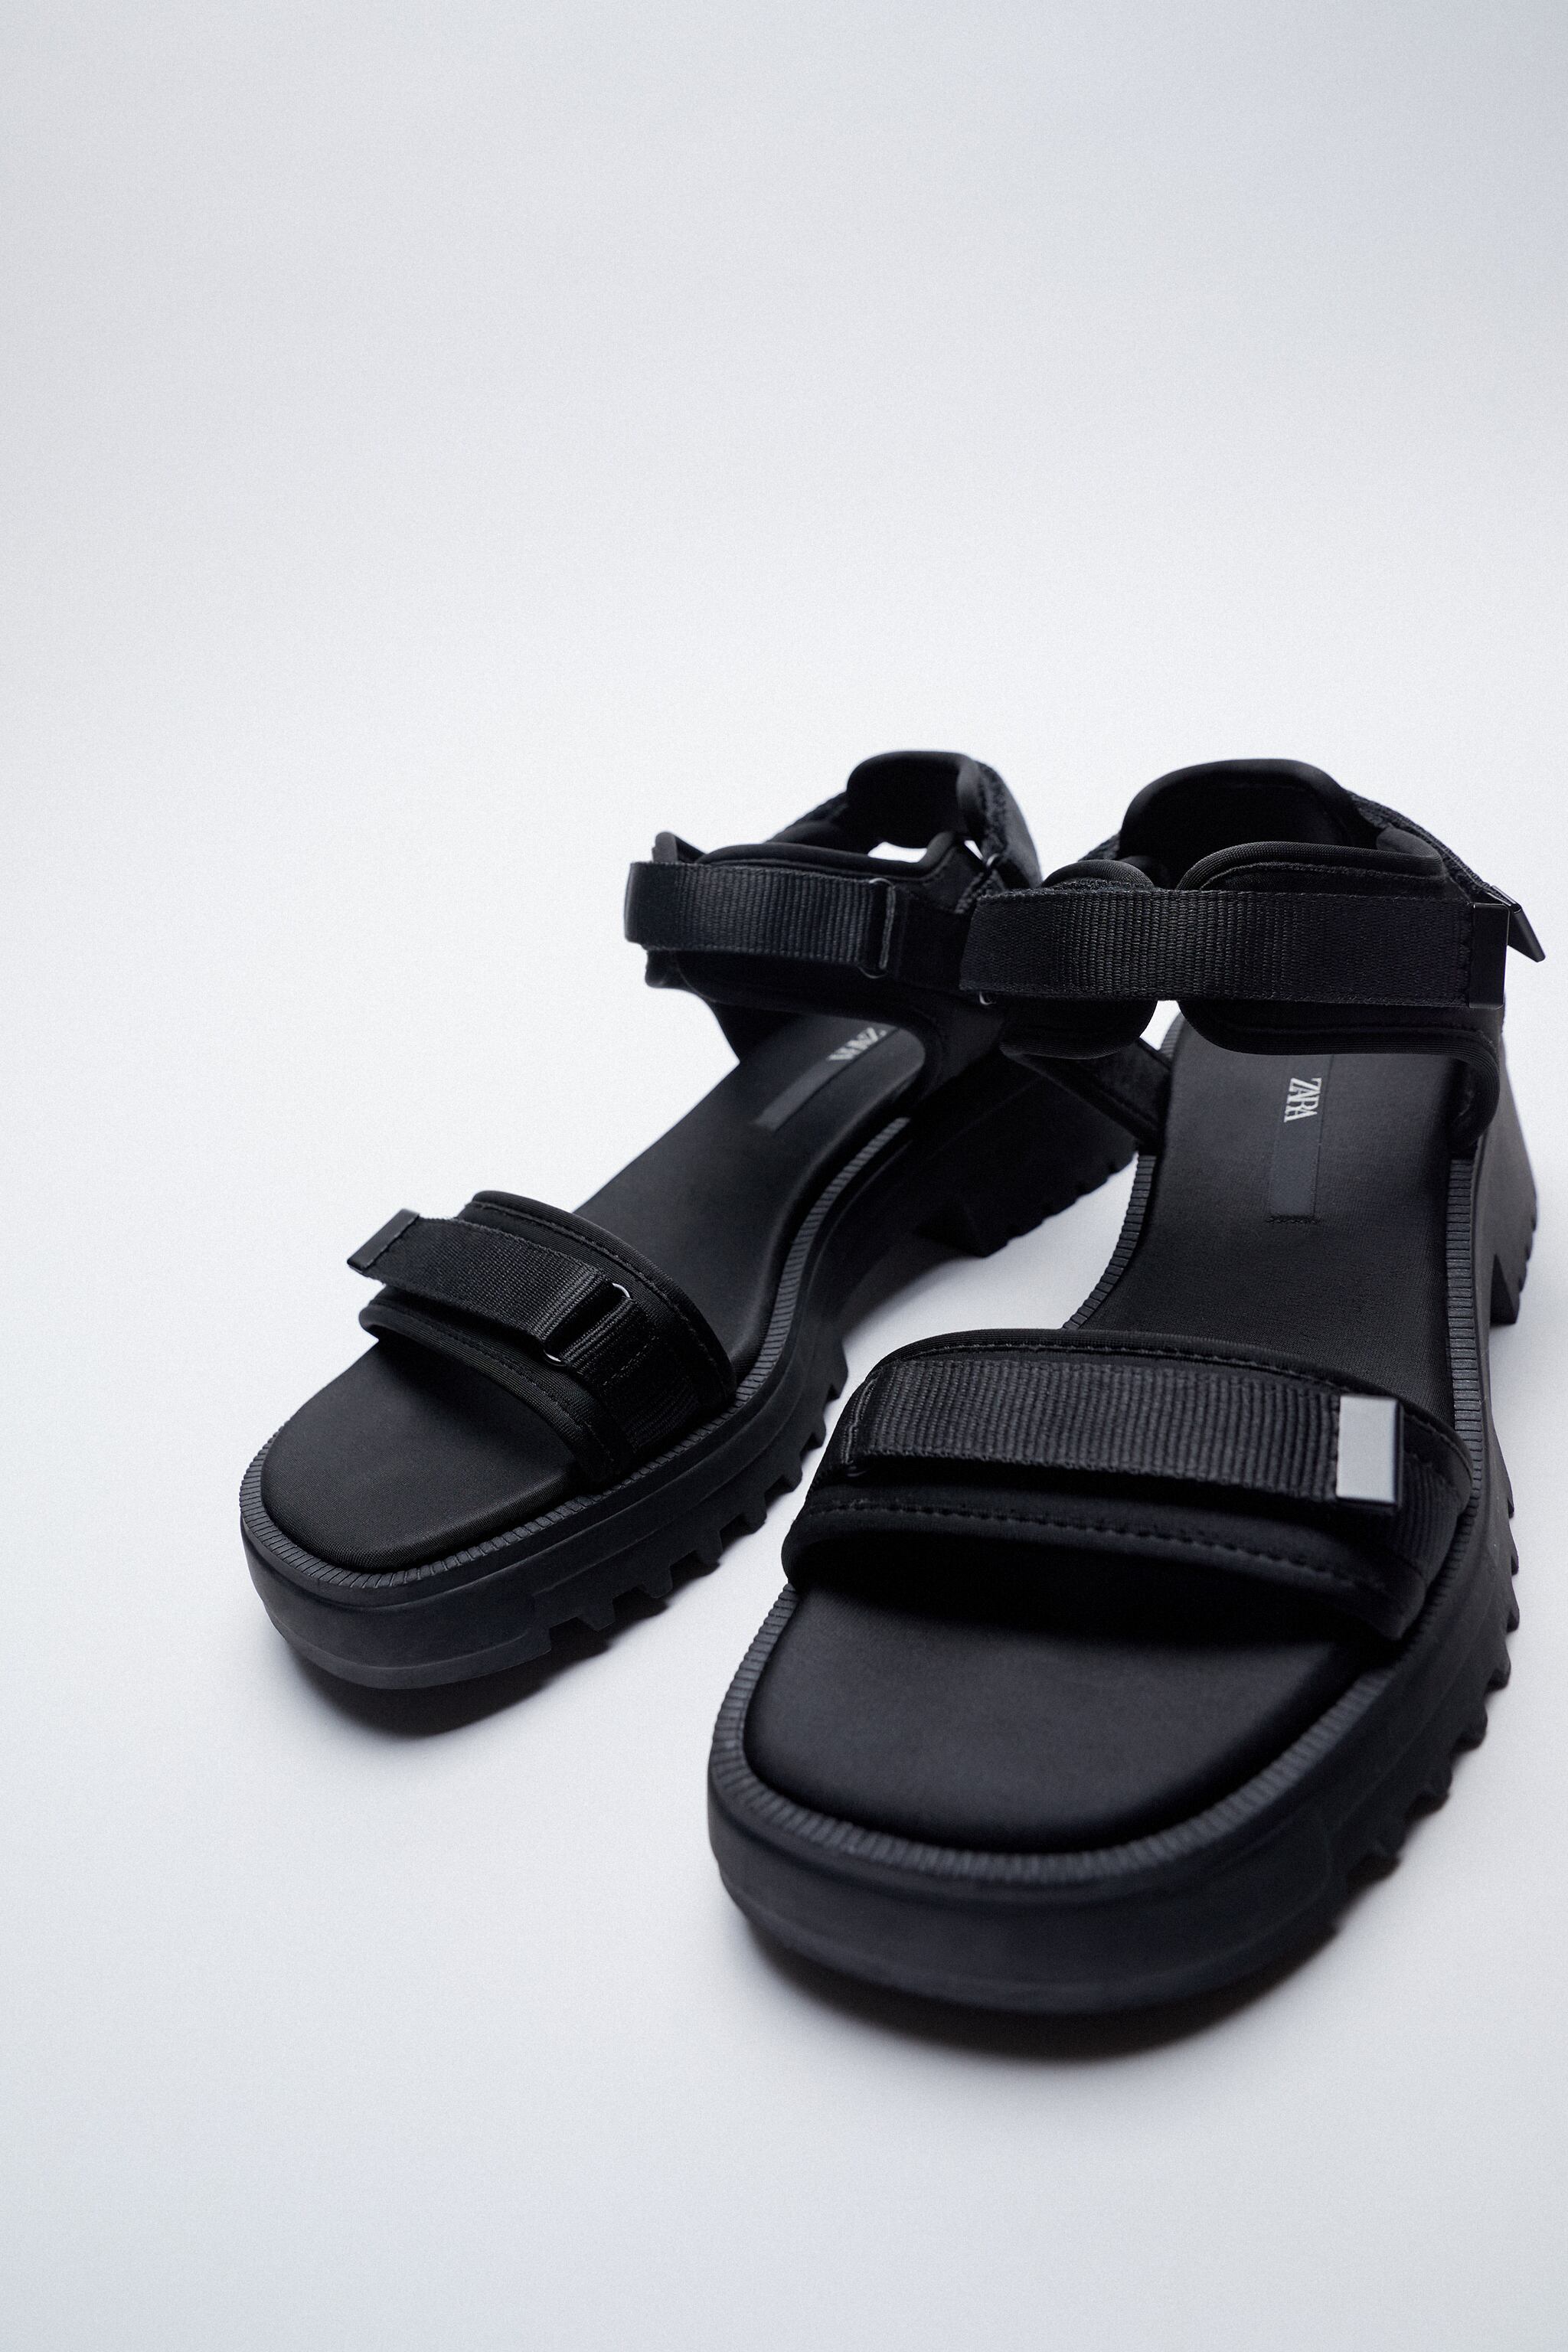 FLAT SANDALS WITH TRACK SOLE in black from Zara